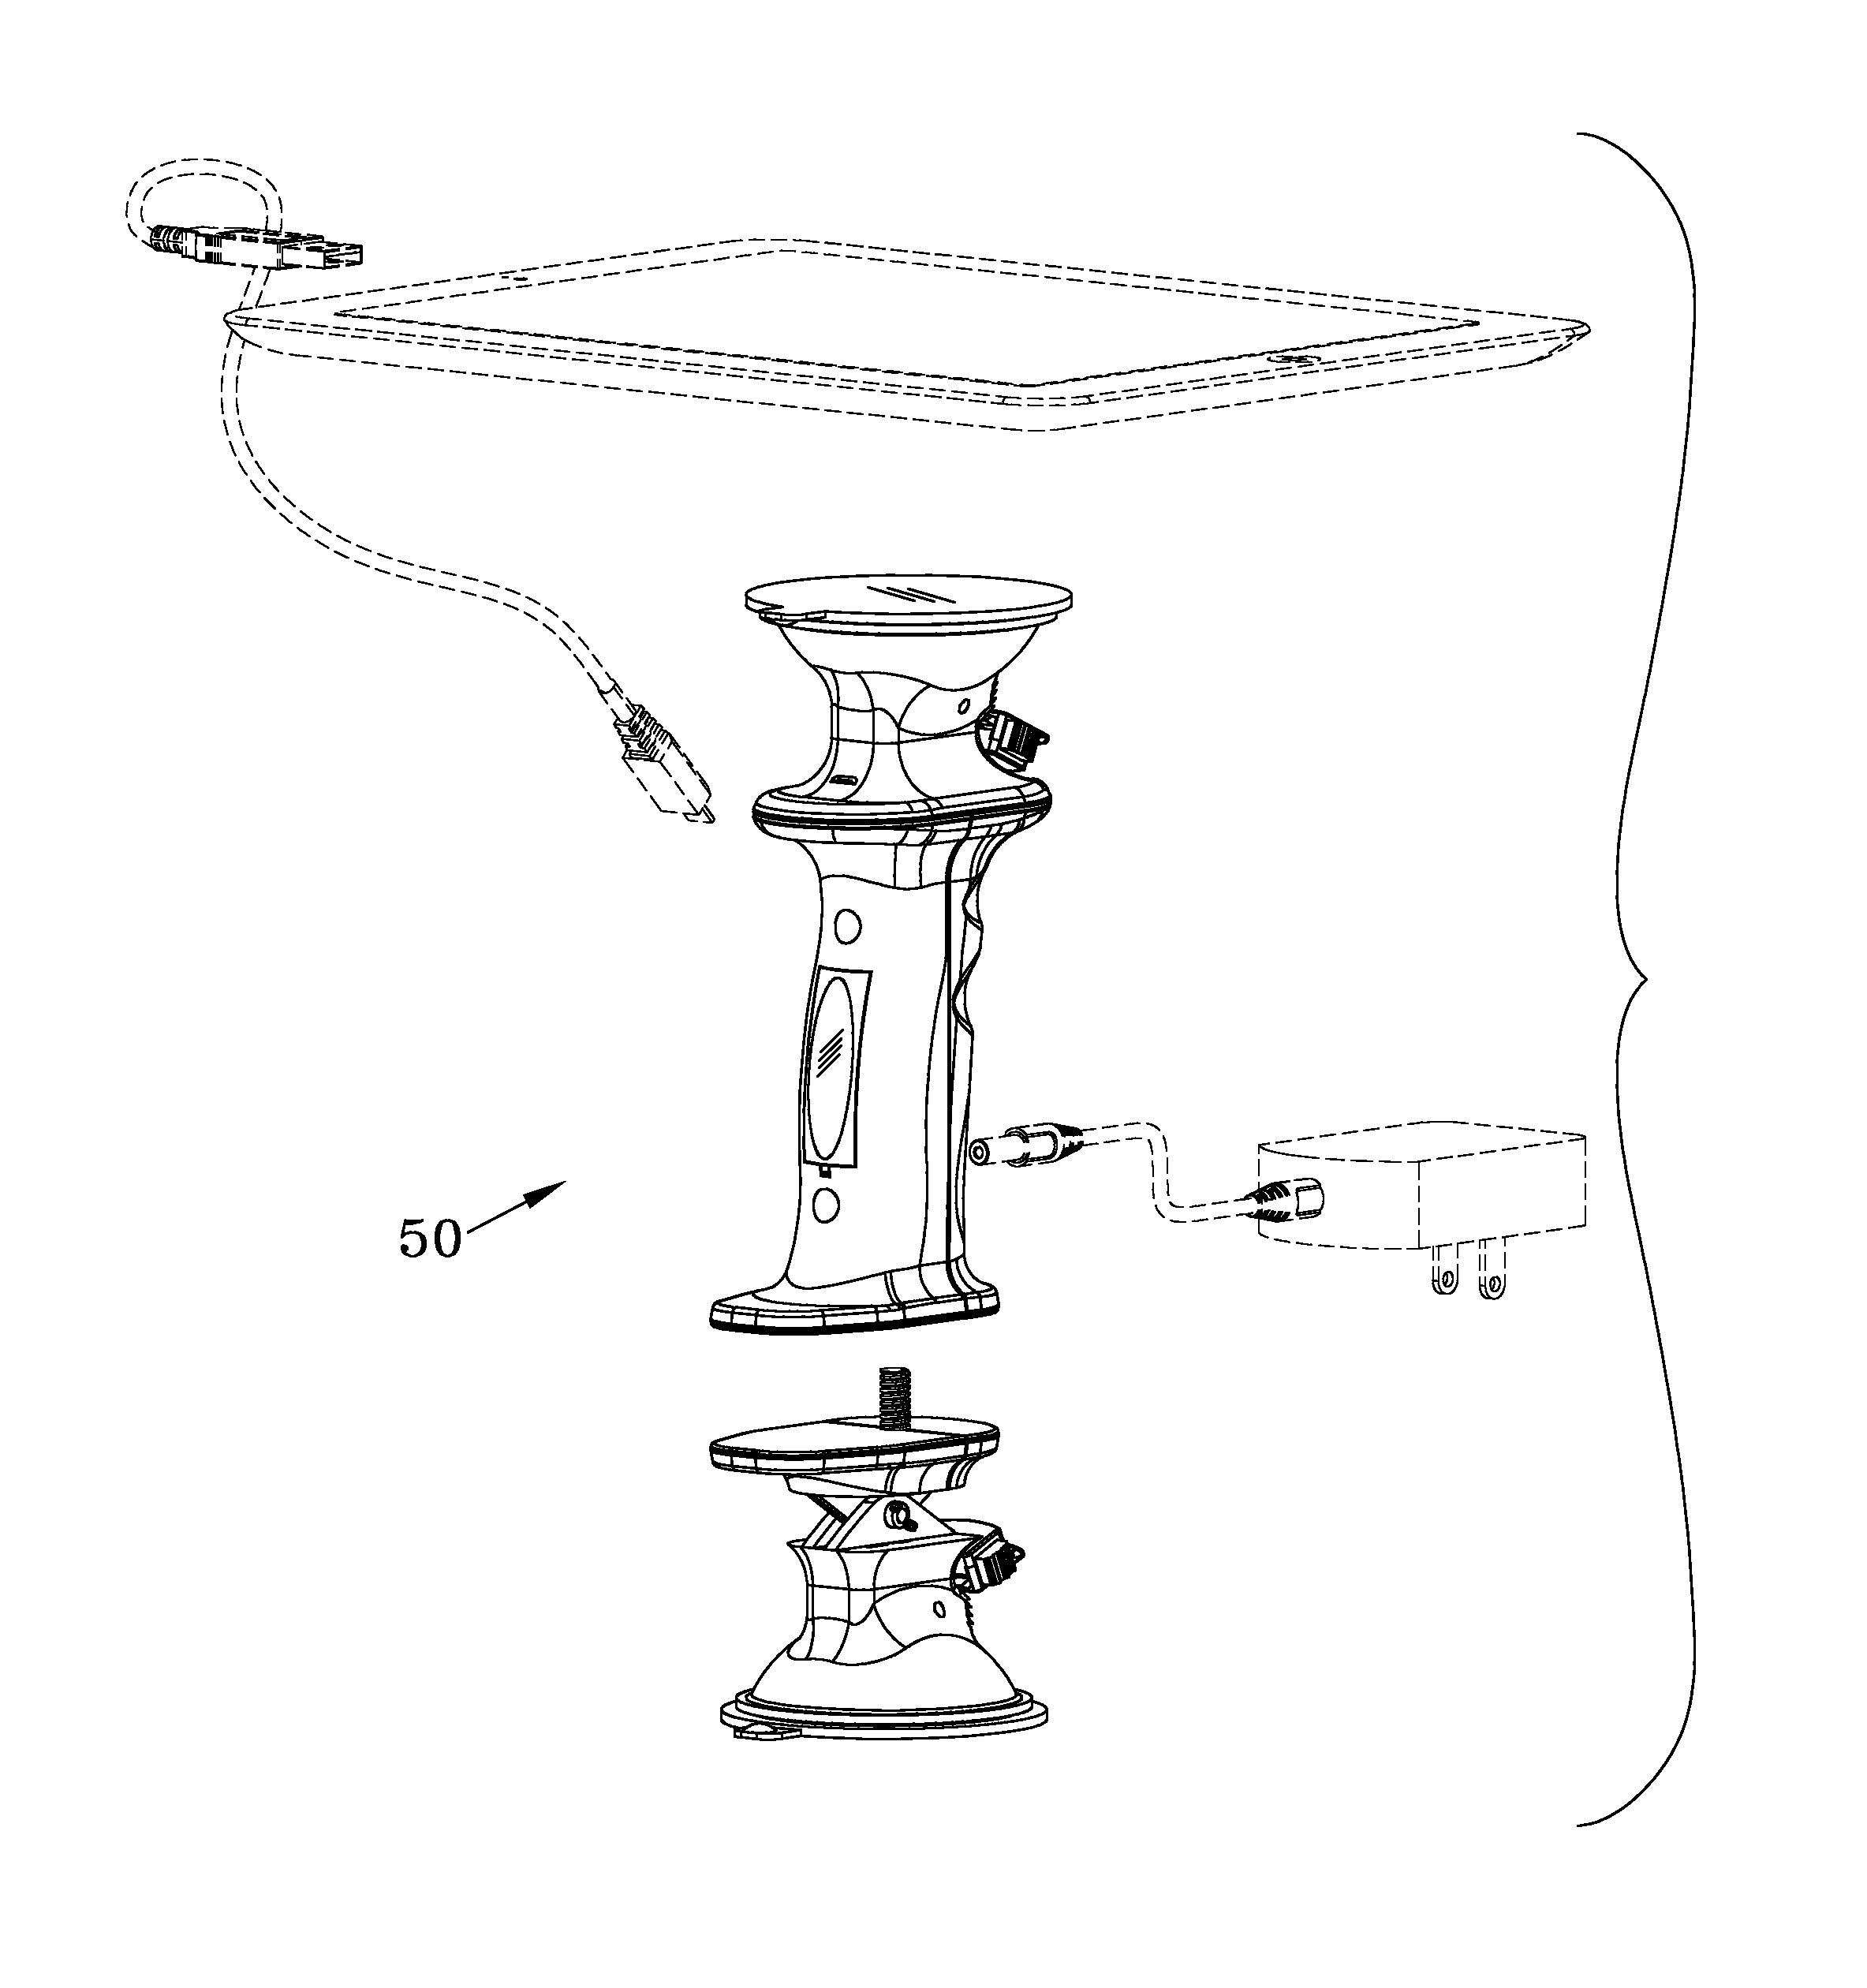 Handheld mount and stand assembly for portable electronic devices